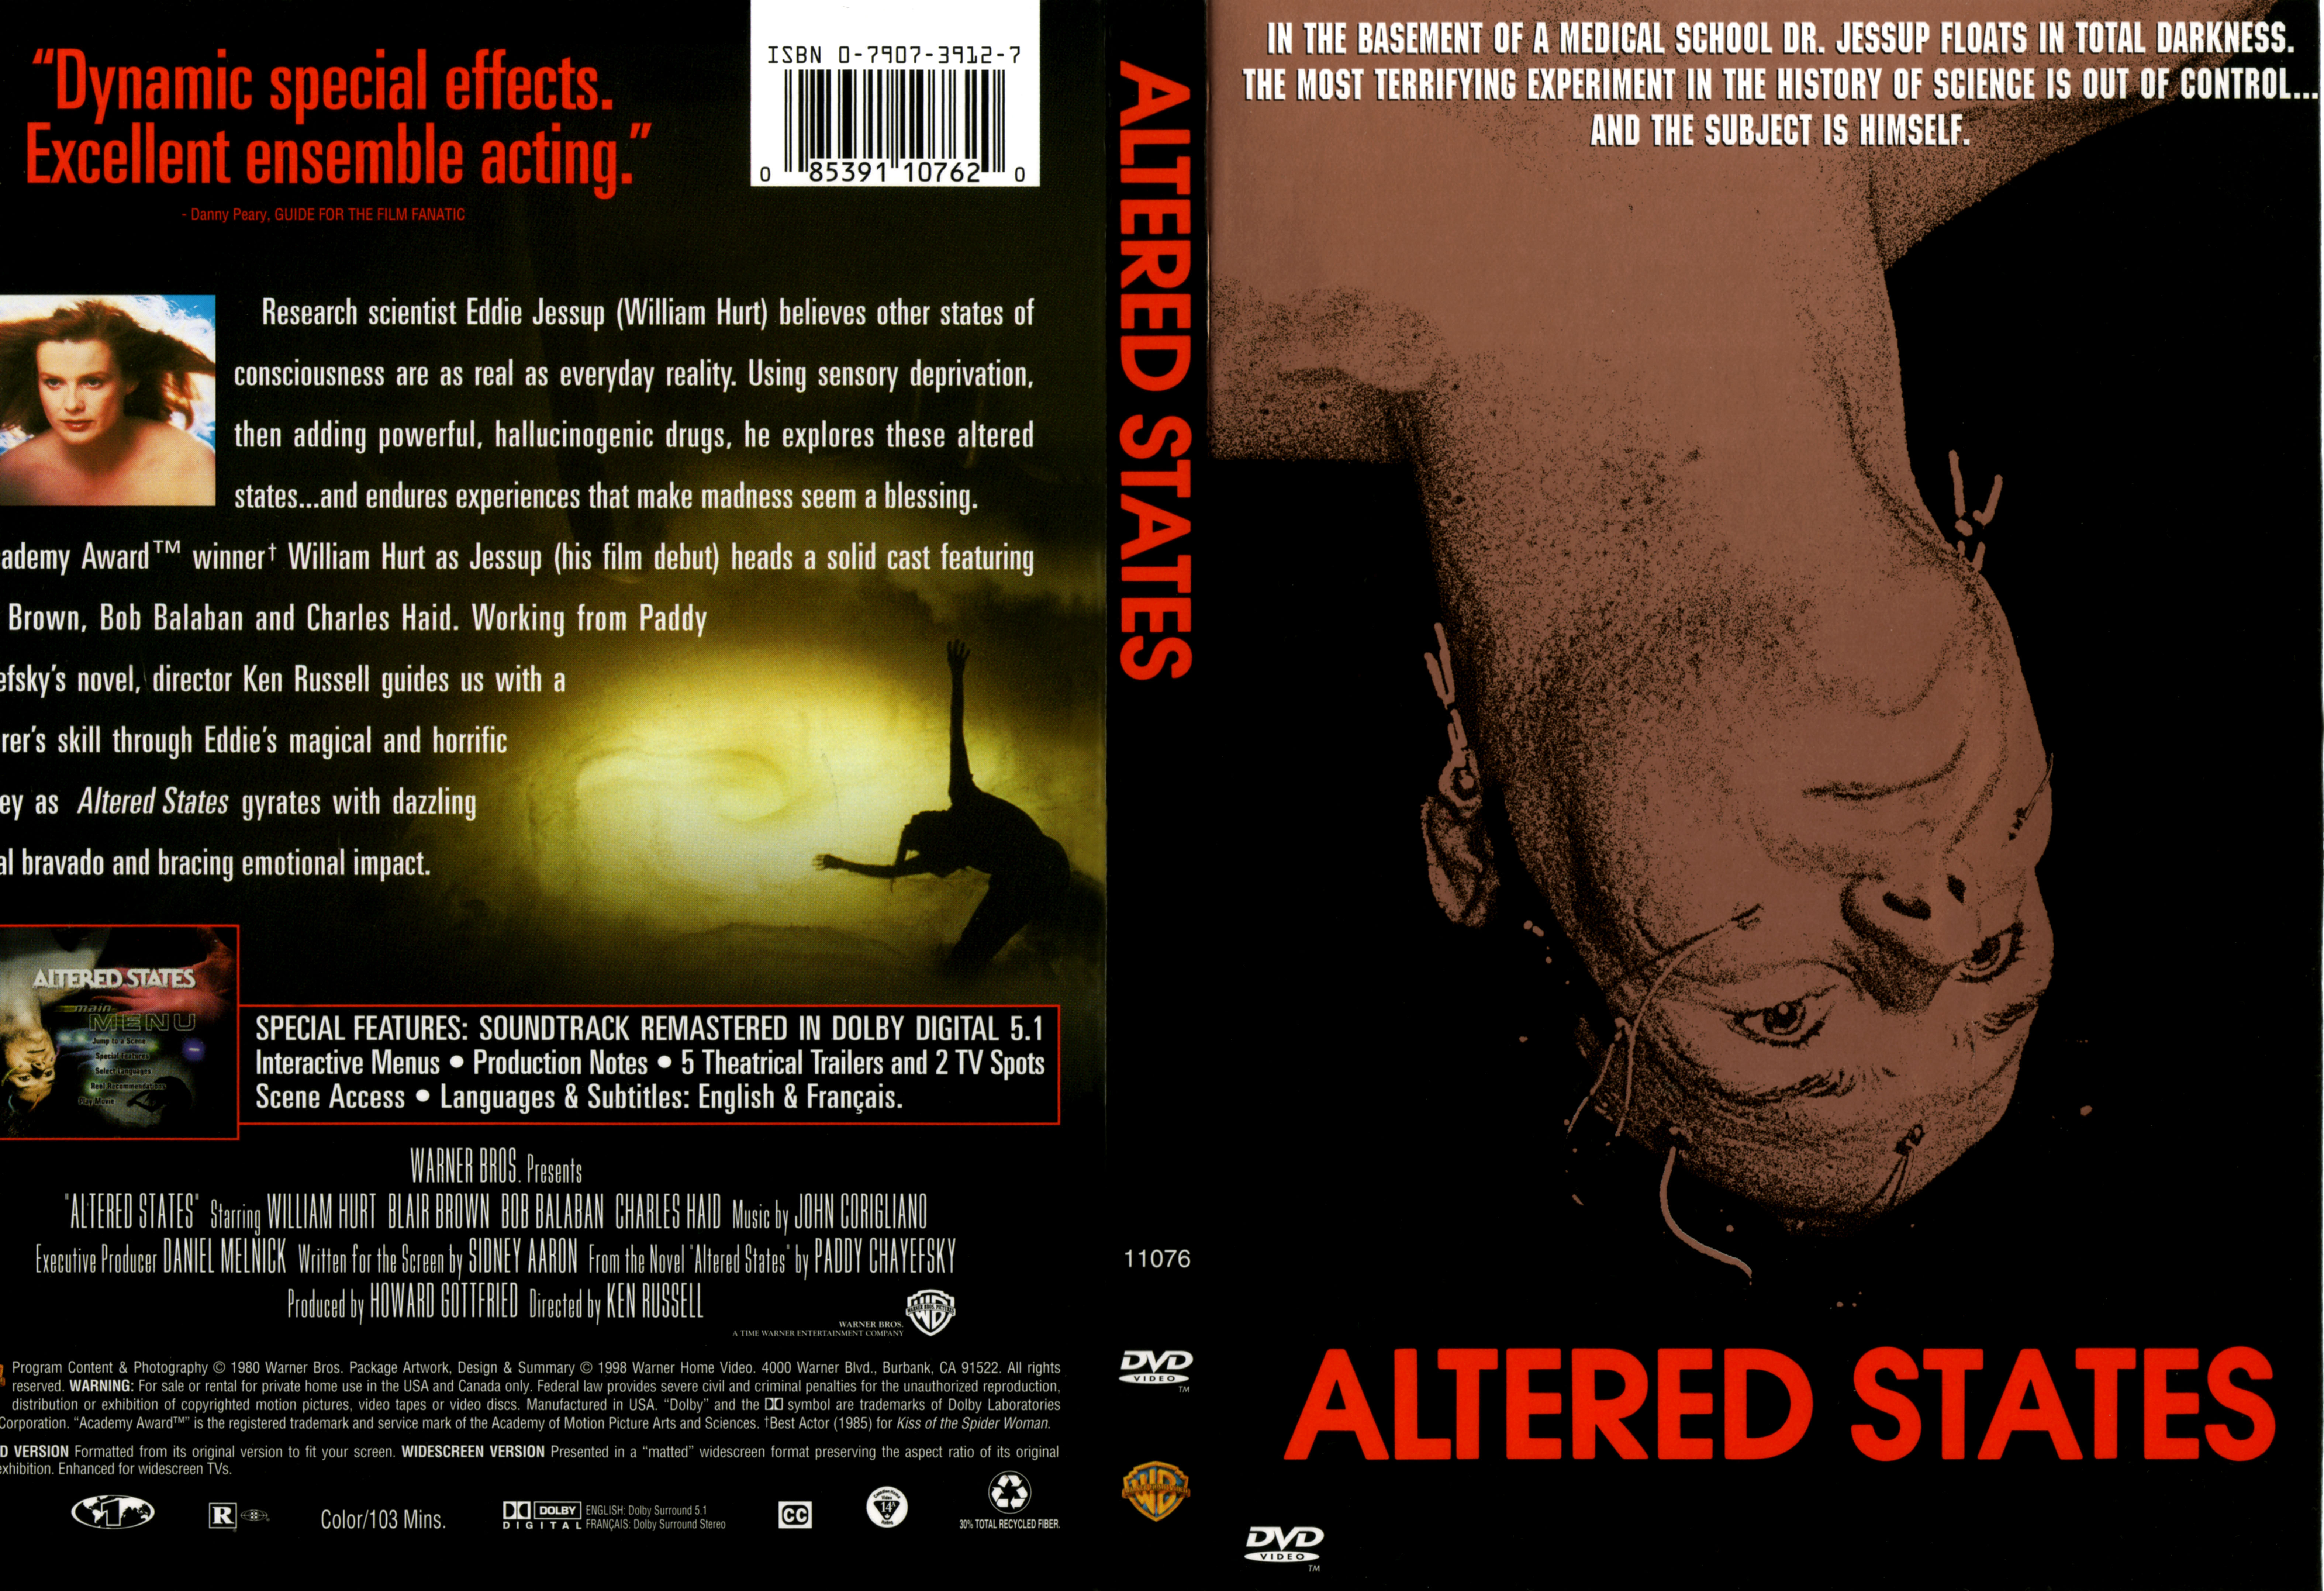 Jaquette DVD Altered states